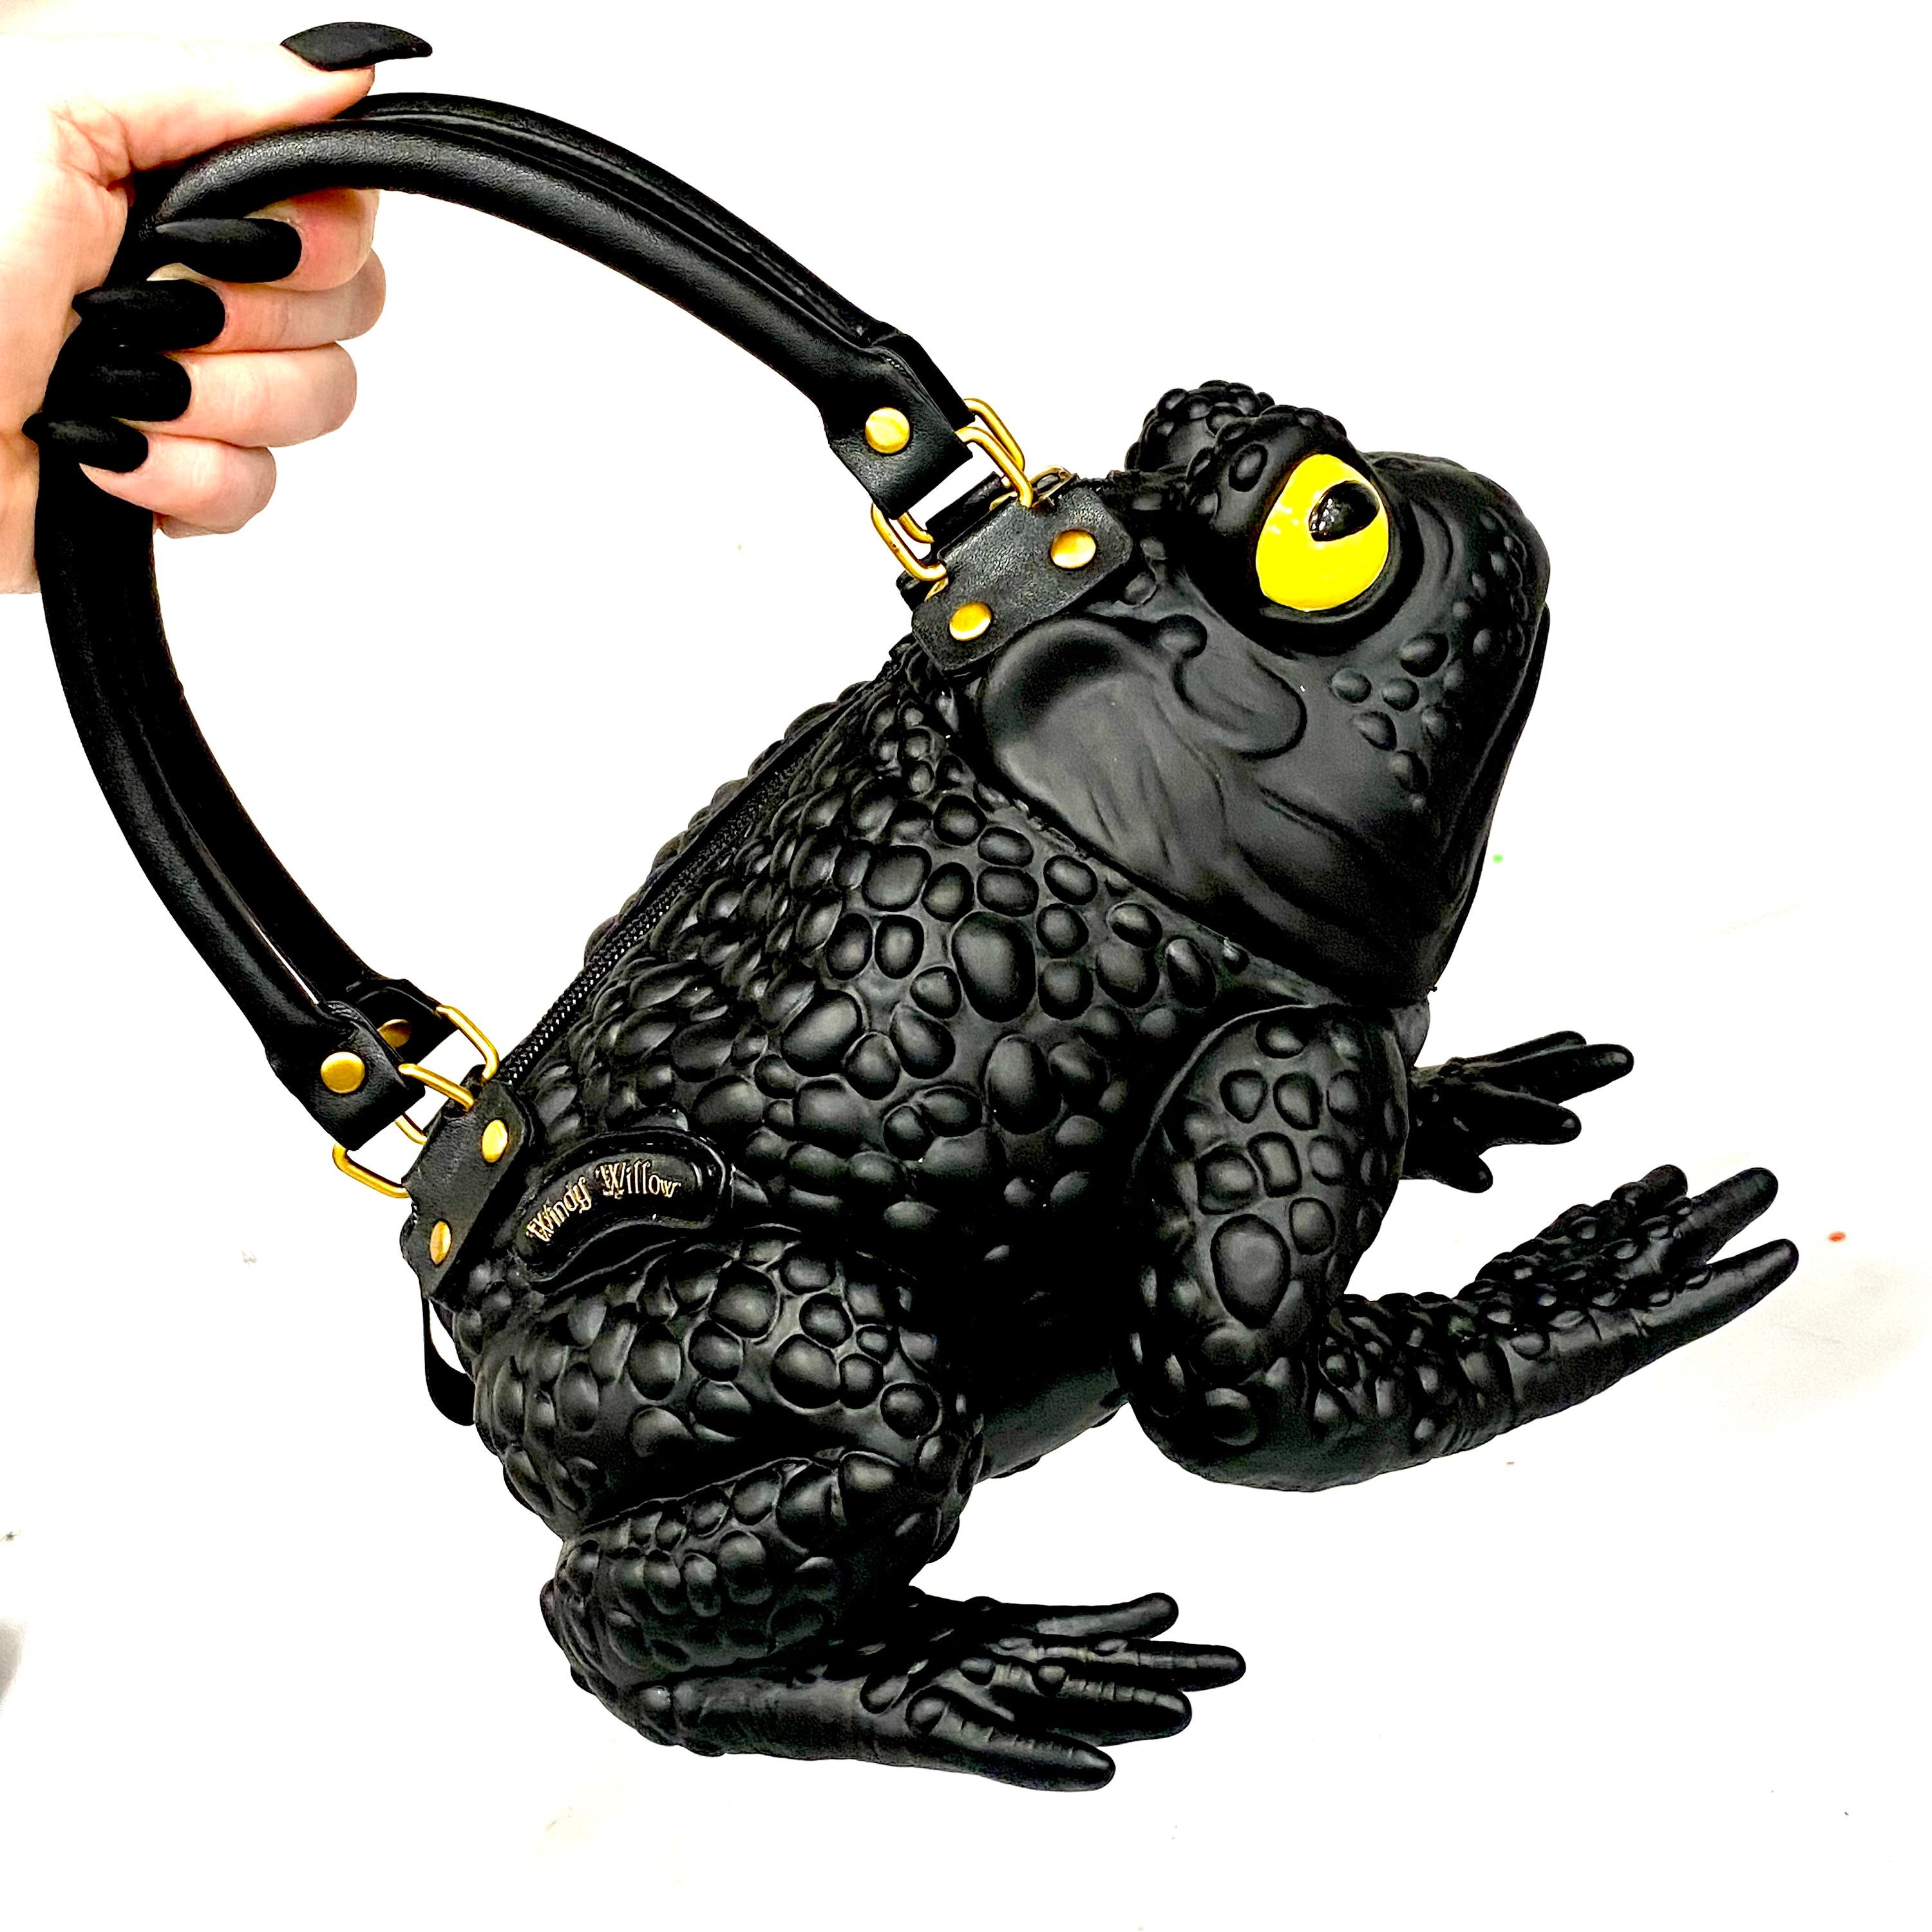 Want to win your own taxidermy cane toad coin purse friend to carry all  your trinkets & add some spice to every look? I'm hosting a giveaway to  grow my insta page!